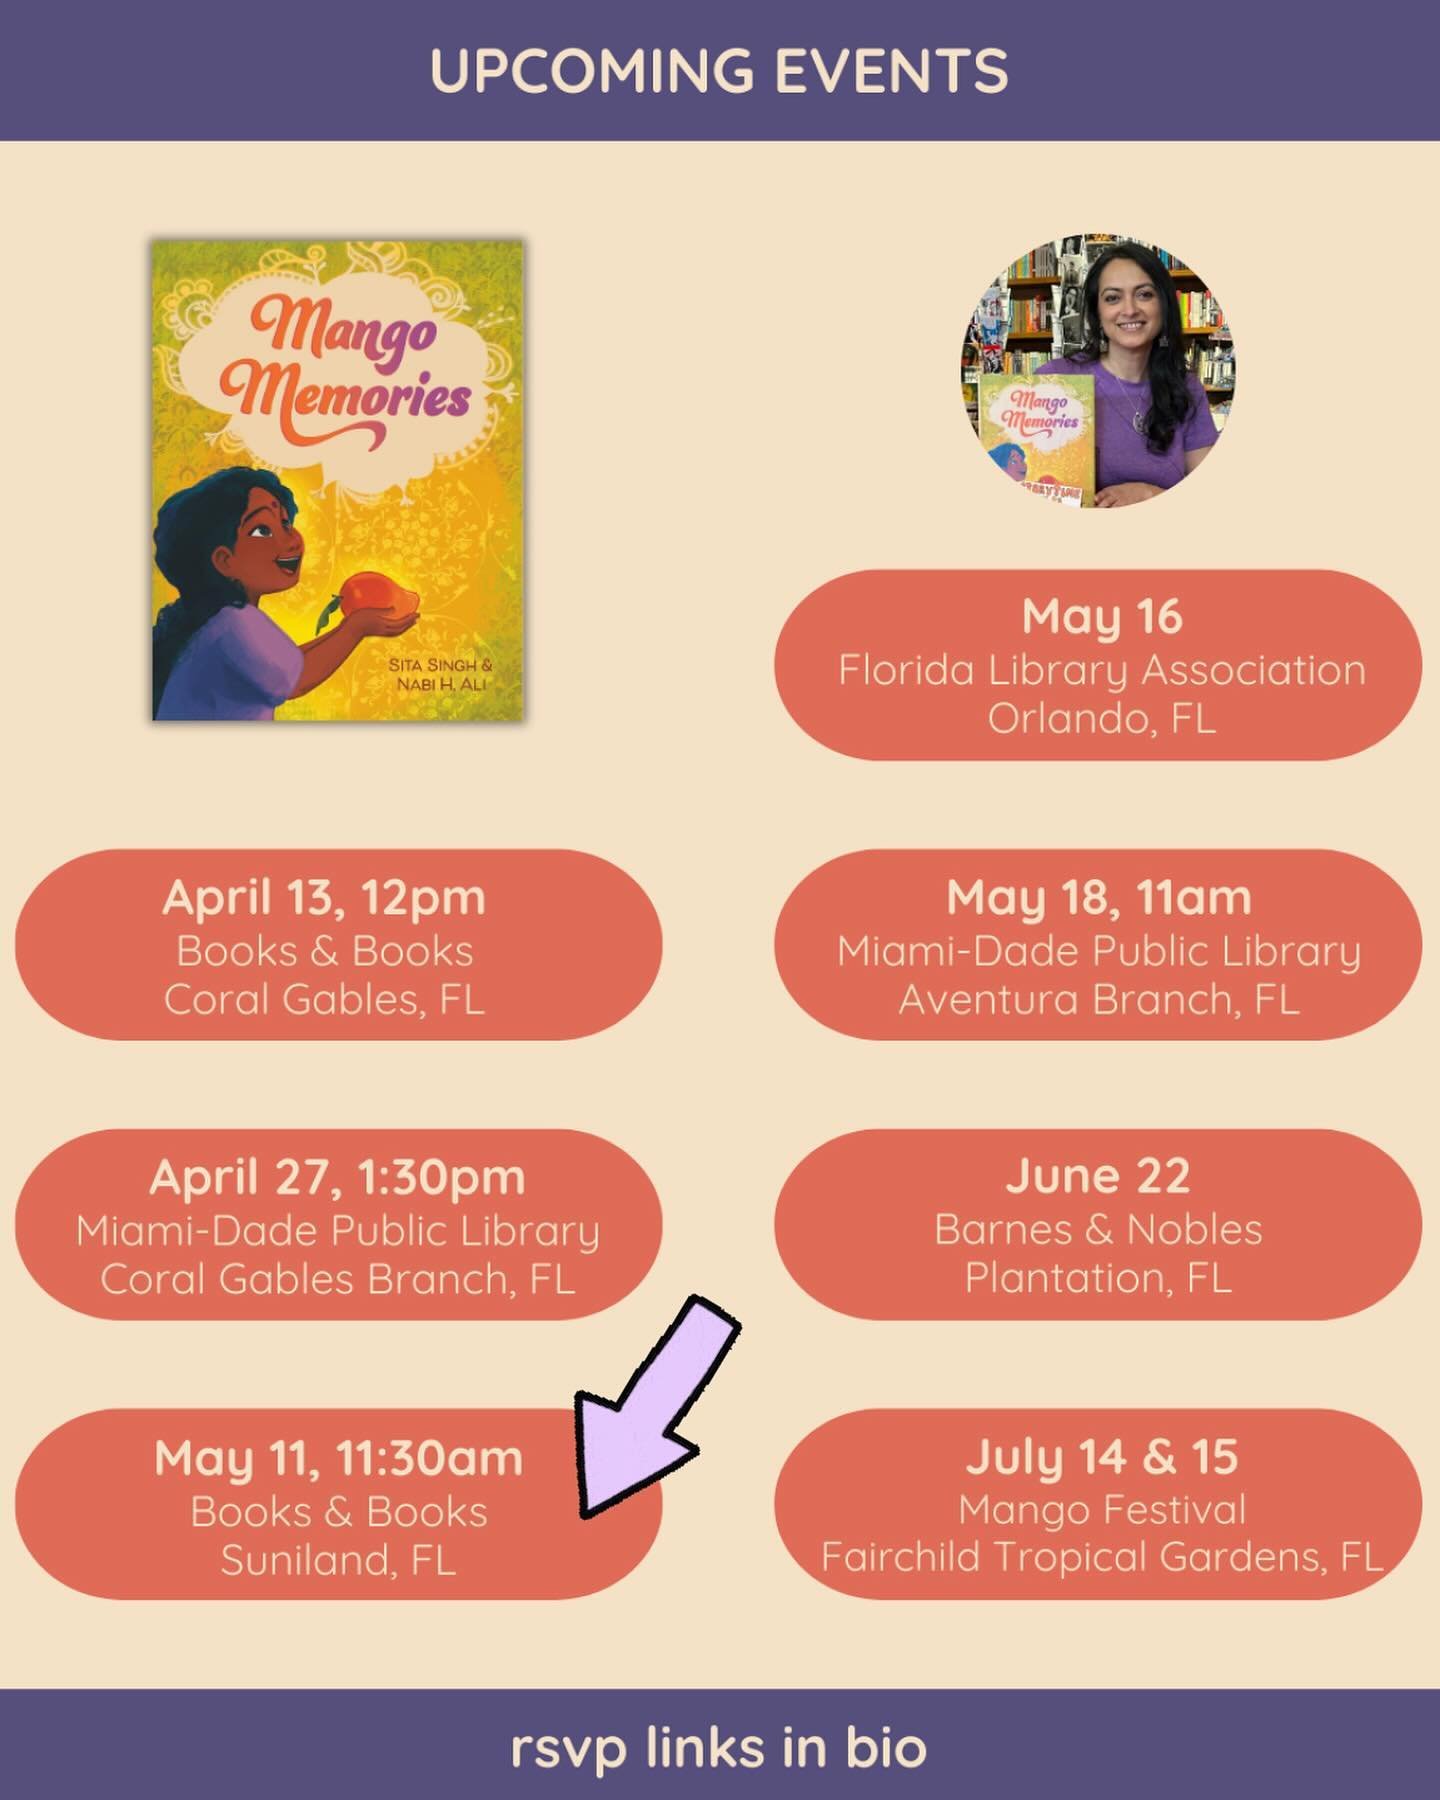 Next Saturday, I&rsquo;ll be at @booksandbooks in Suniland. If you&rsquo;re local, stop by for a storytime in the store&rsquo;s cute &amp; cozy children&rsquo;s book section. 🥭🥭🥭

**registration link in bio**

@nabihaiderali @anneschwartzbooks  @r